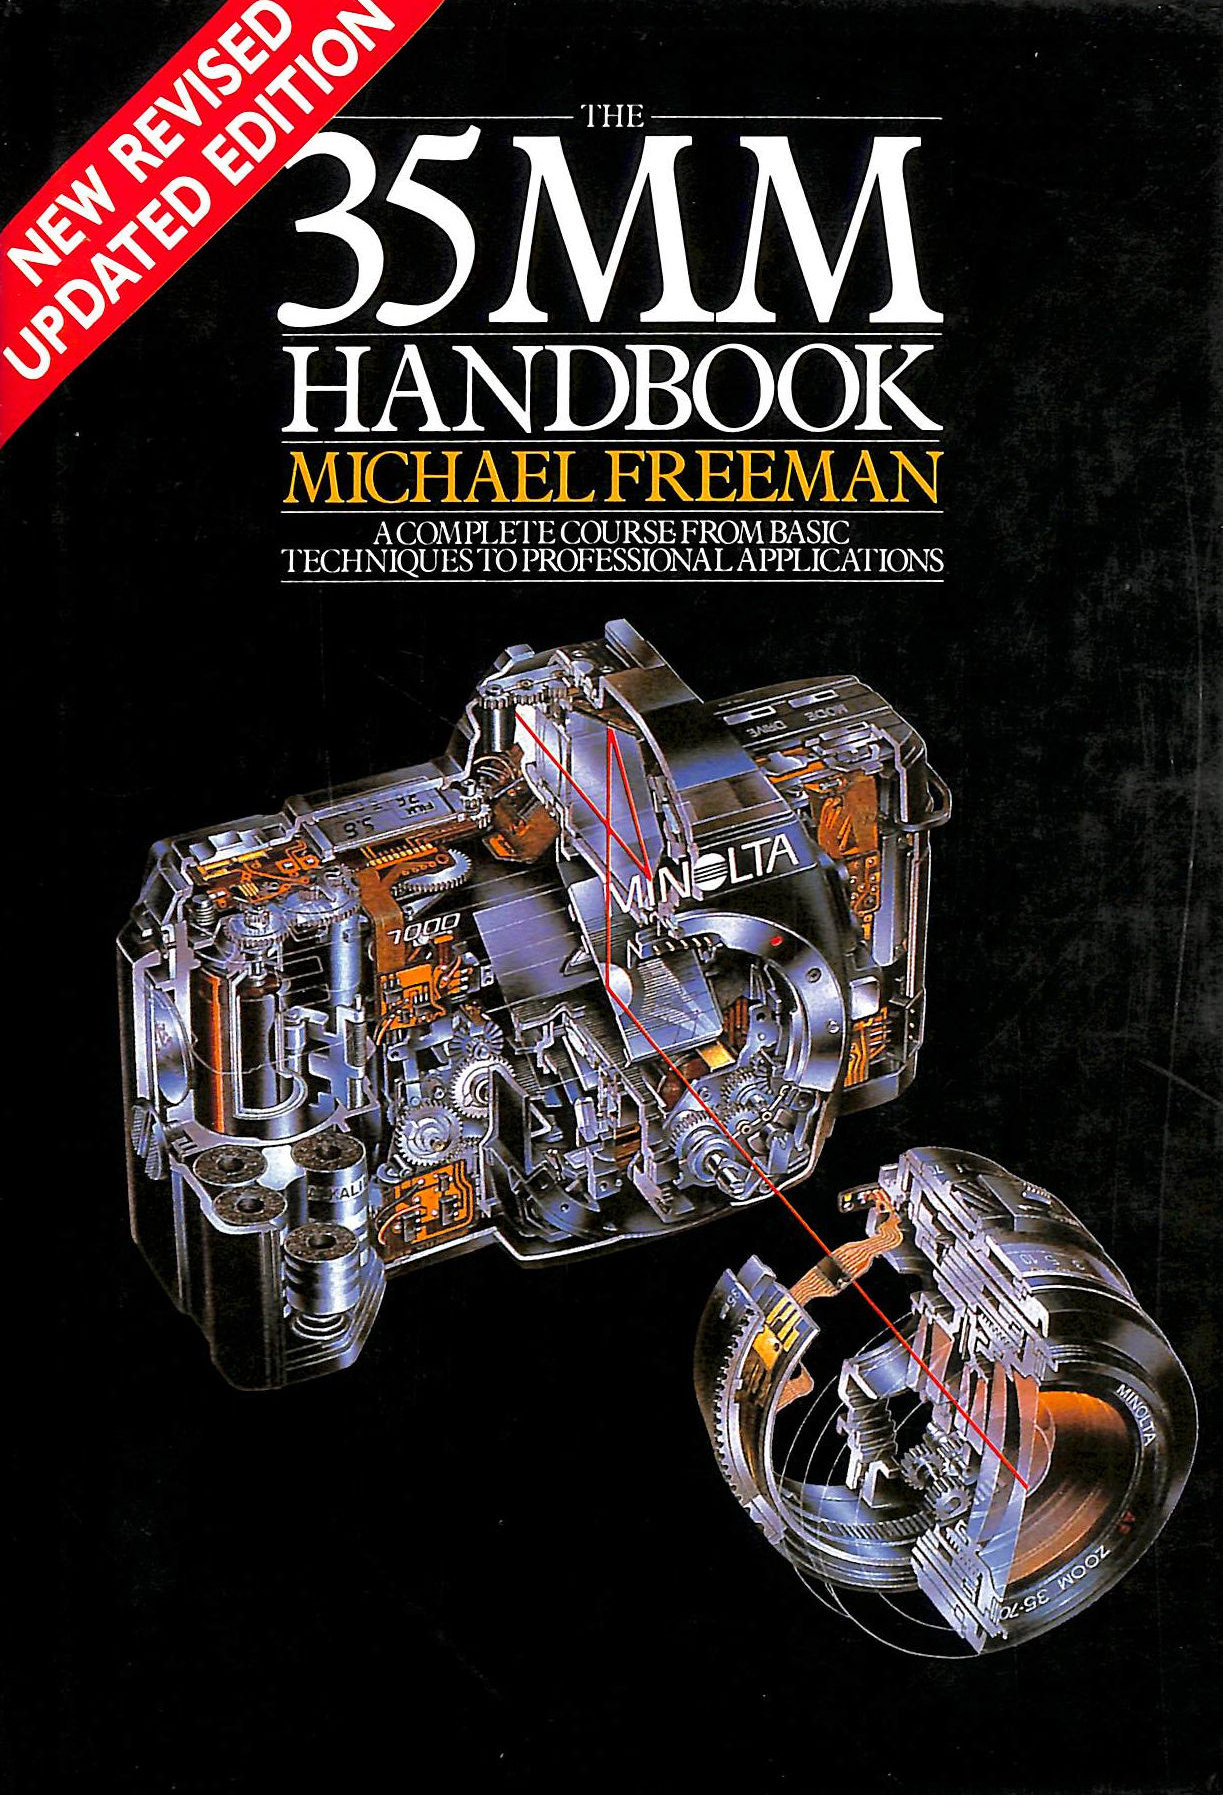 MICHAEL FREEMAN - 35 MM Handbook: A Complete Course From Basic Techniques To Professional Applications